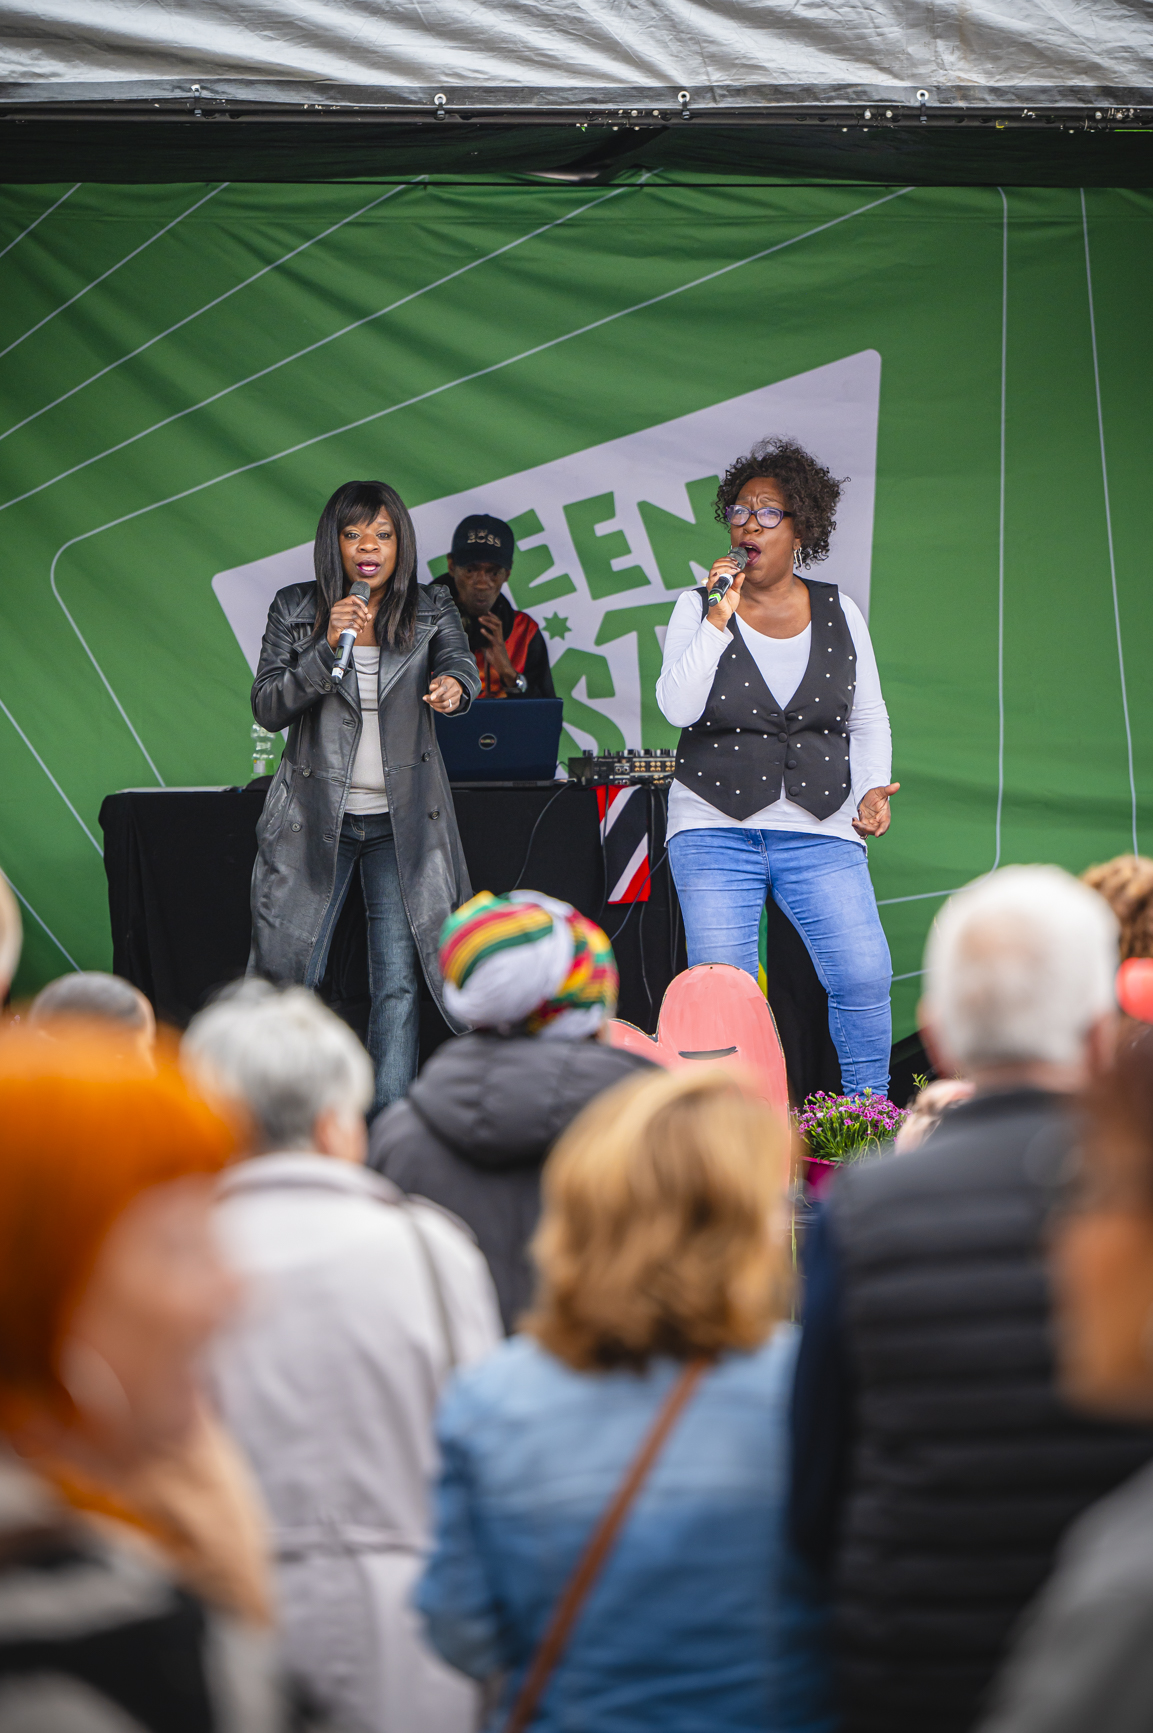 Two people on the Green Hustle stage holding mics and singing to the crowd